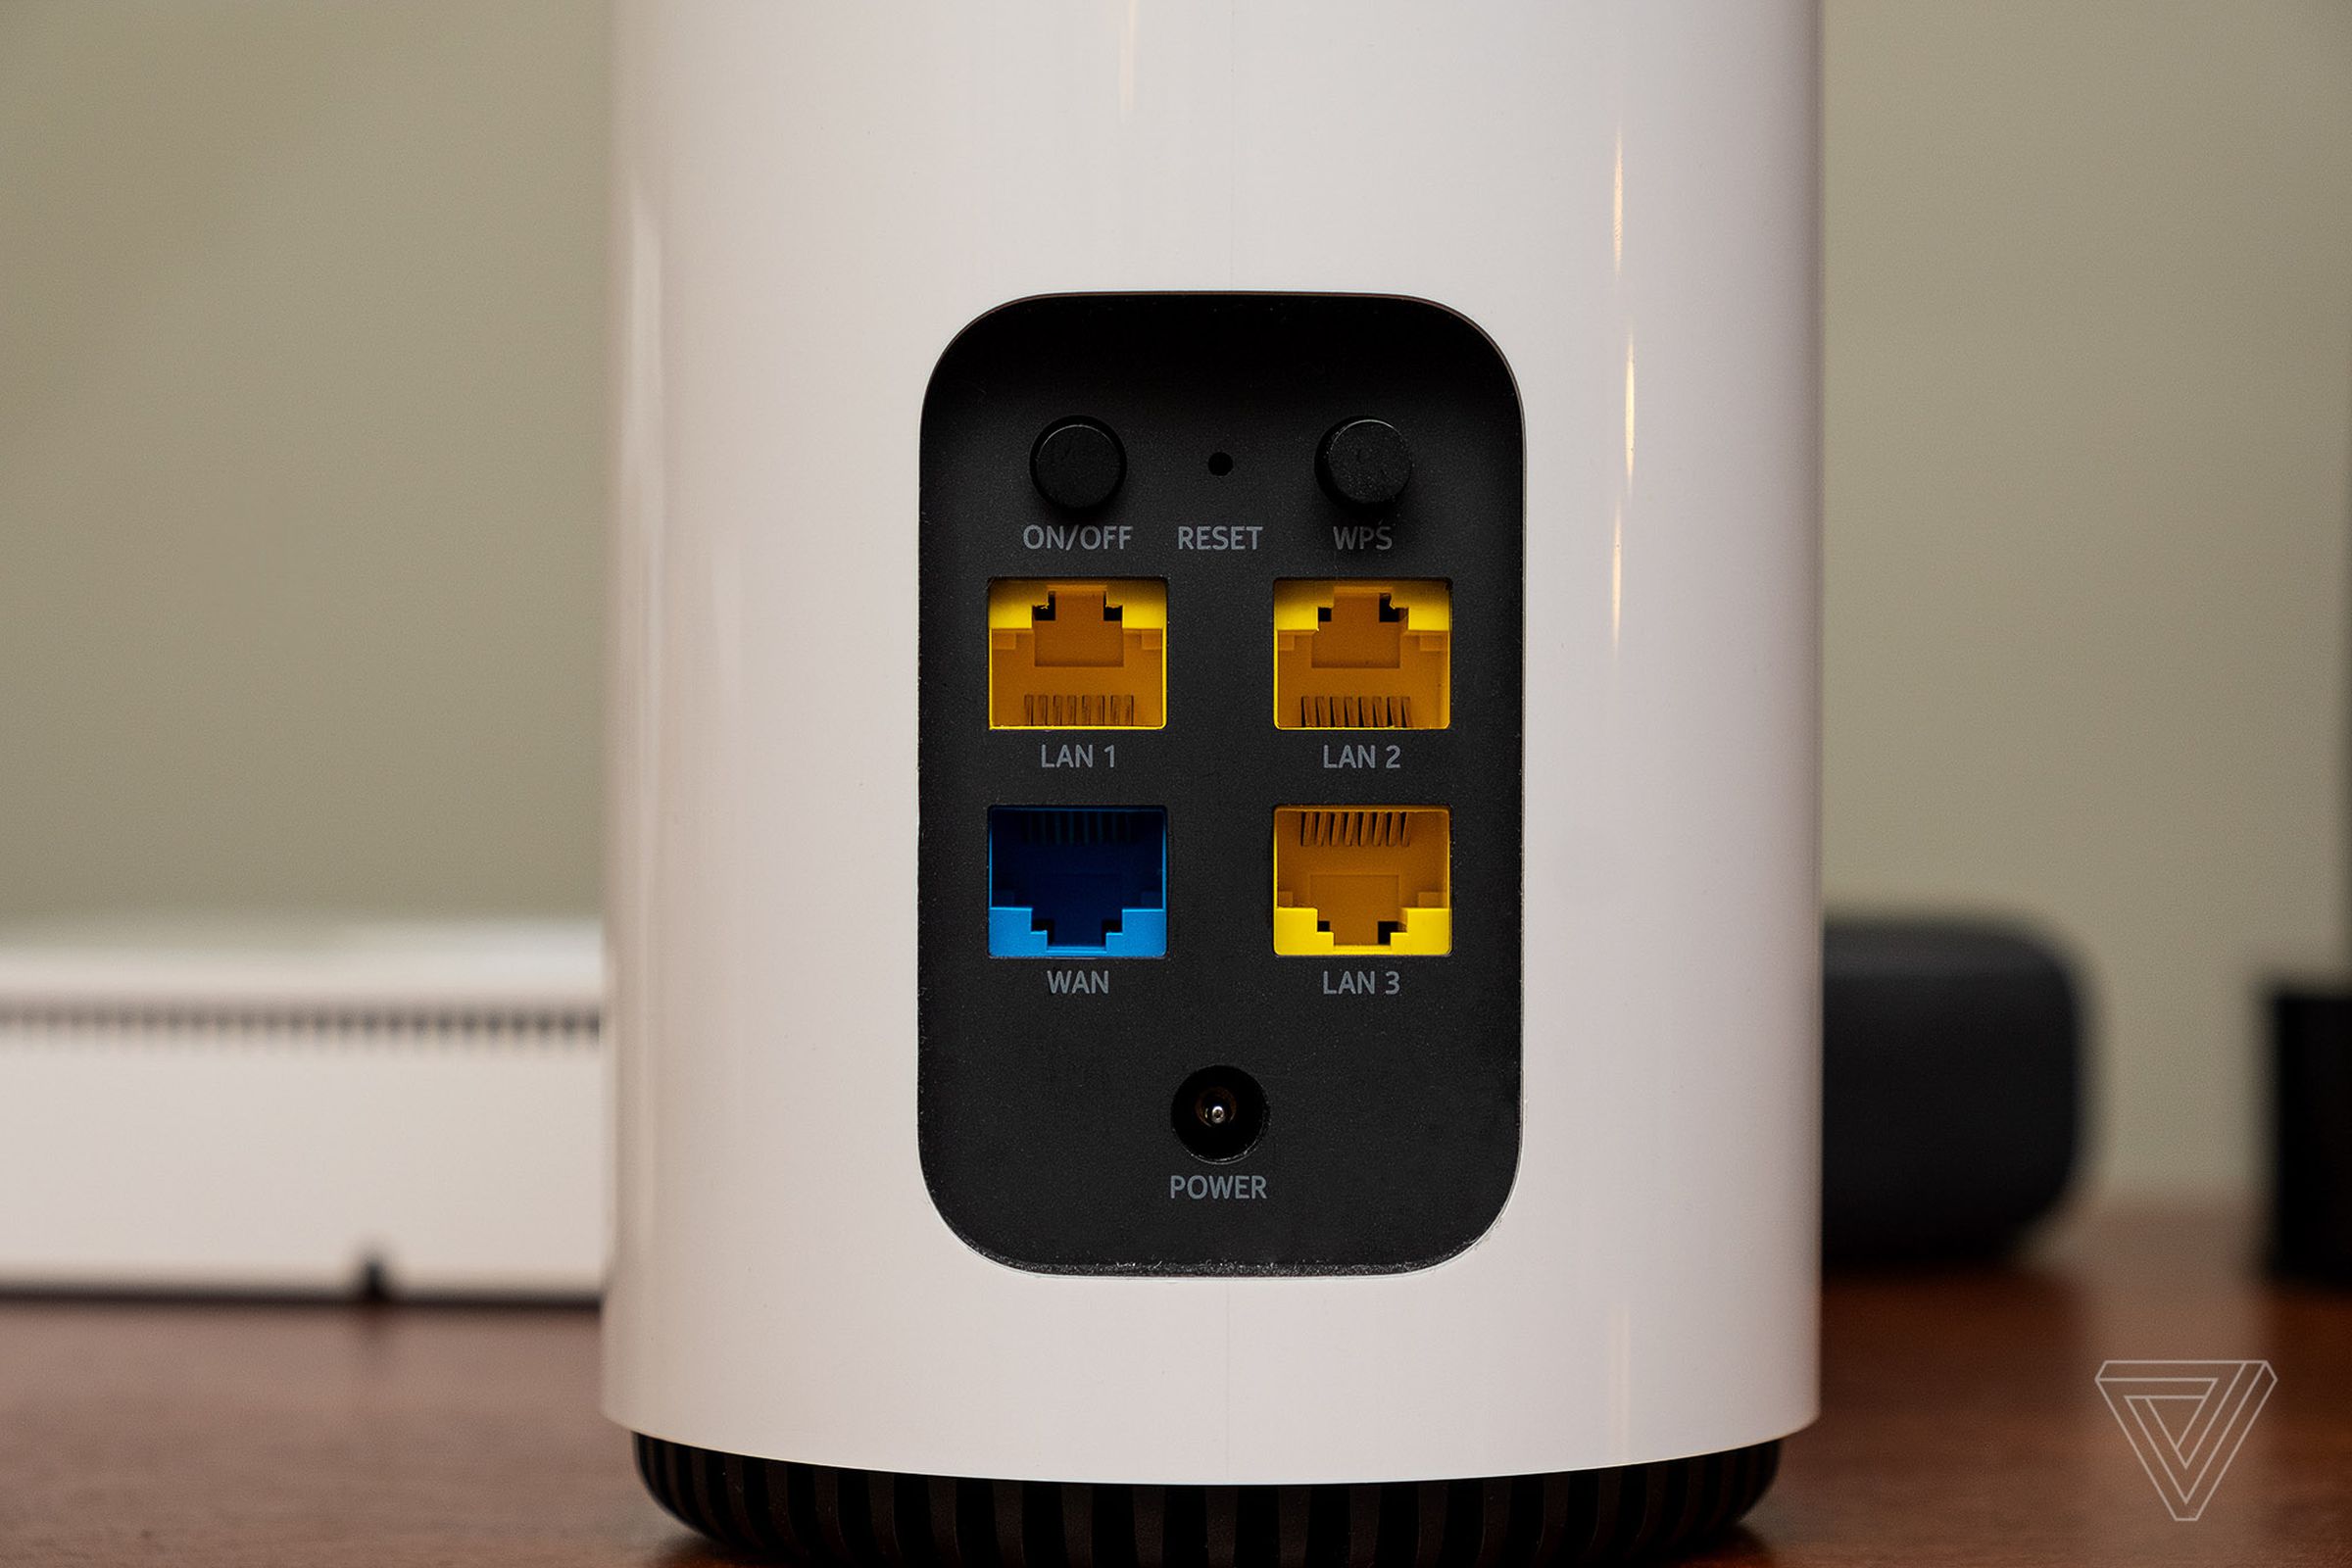 Each Beacon 3 unit has four Ethernet jacks for plugging in devices and hubs.